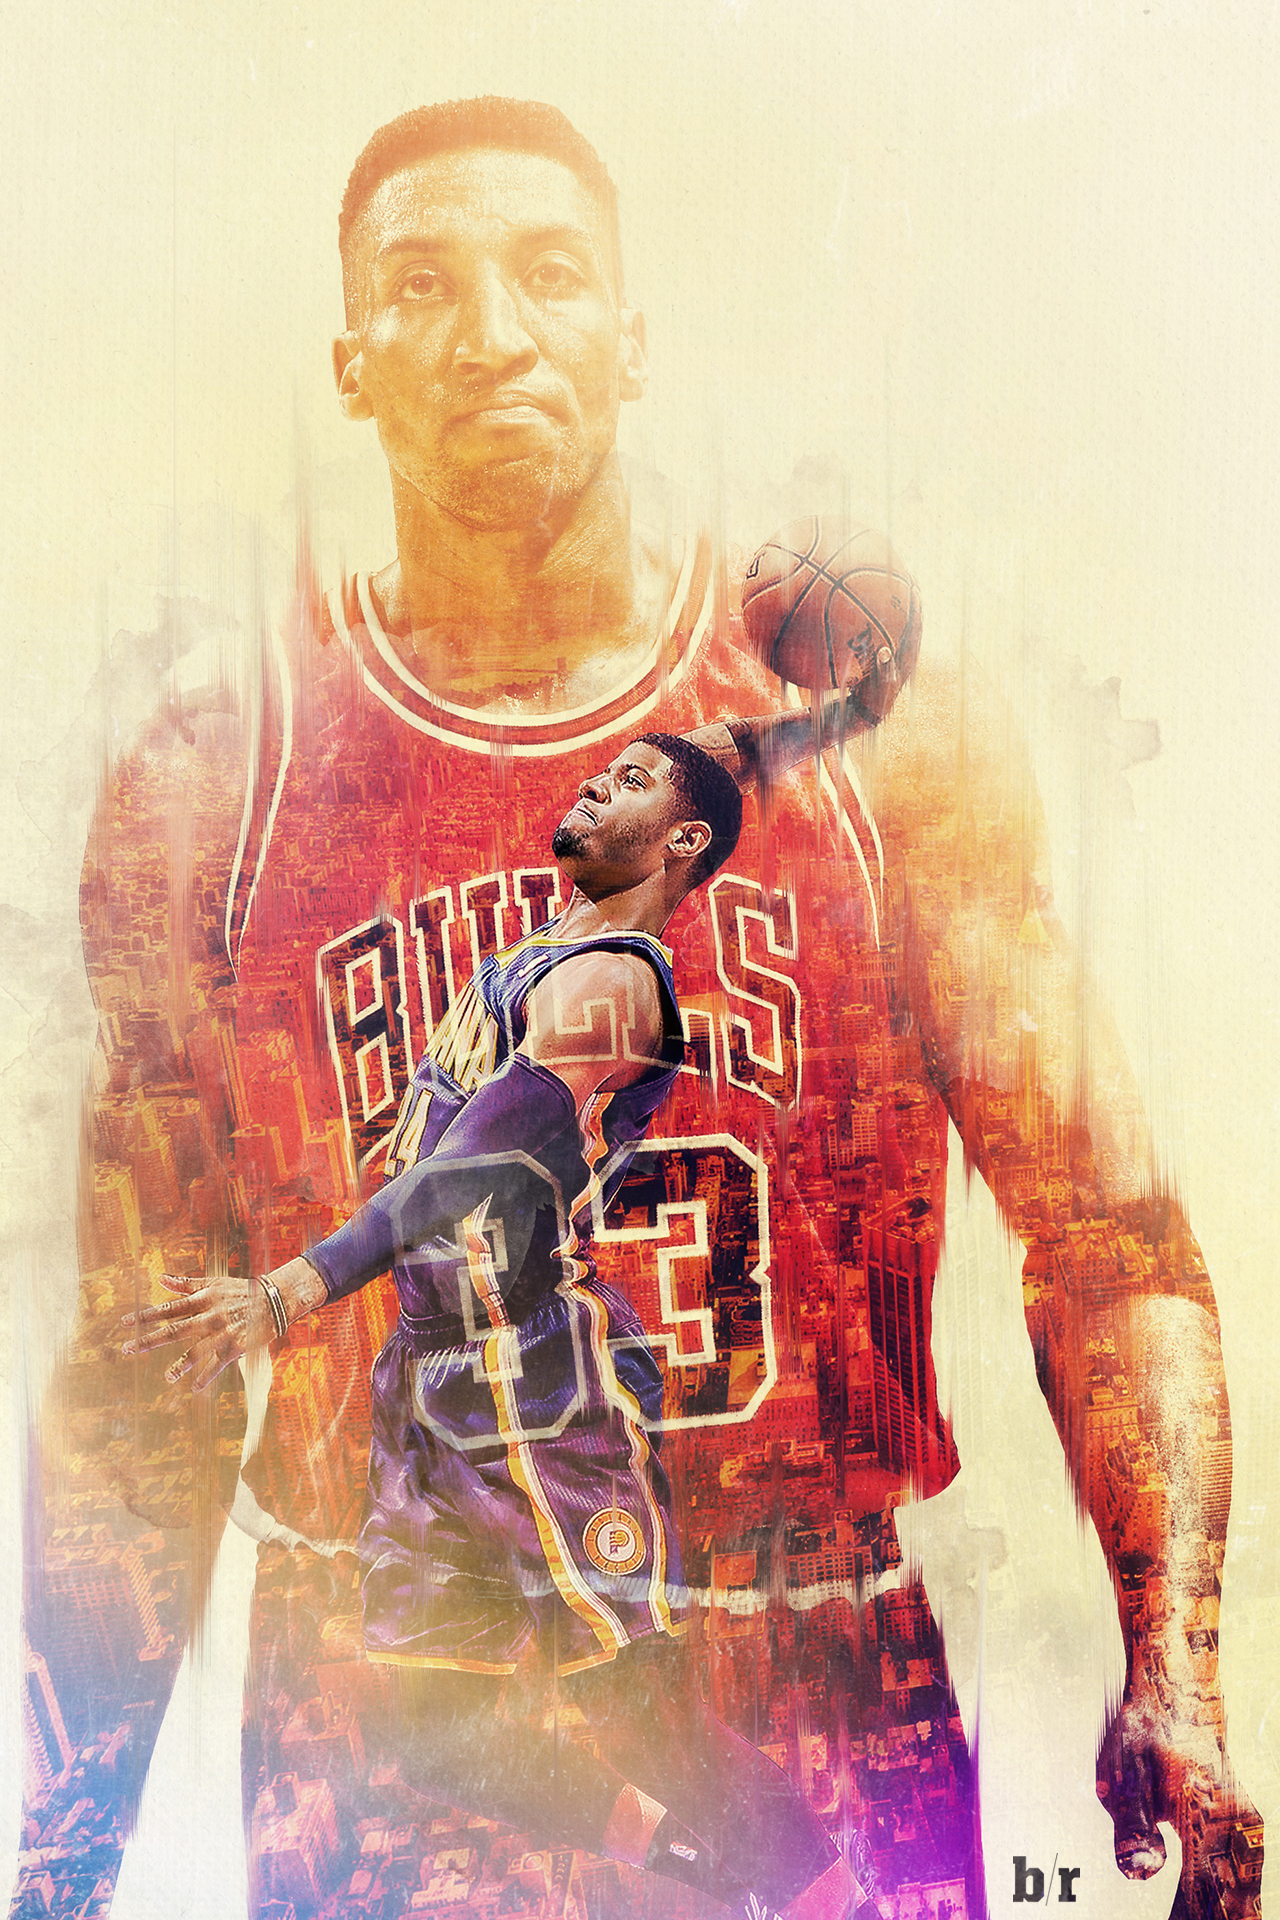 1000+ images about Awesome NBA on Pinterest | NBA, Nba ...